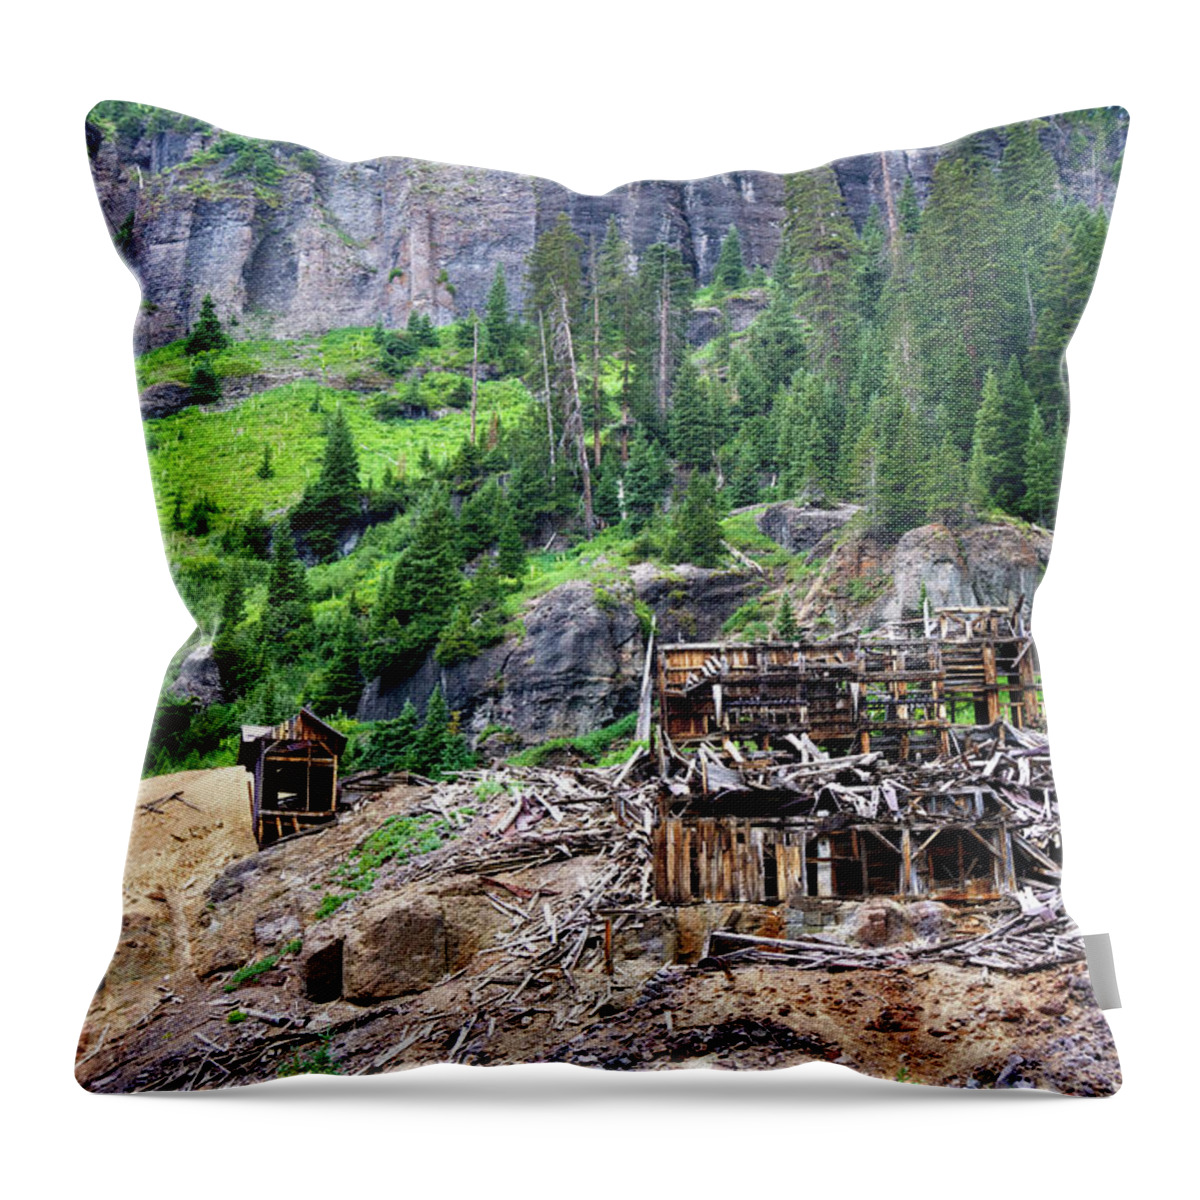 Colorado Throw Pillow featuring the photograph Atlas Stamp Mill Ruins by Lana Trussell